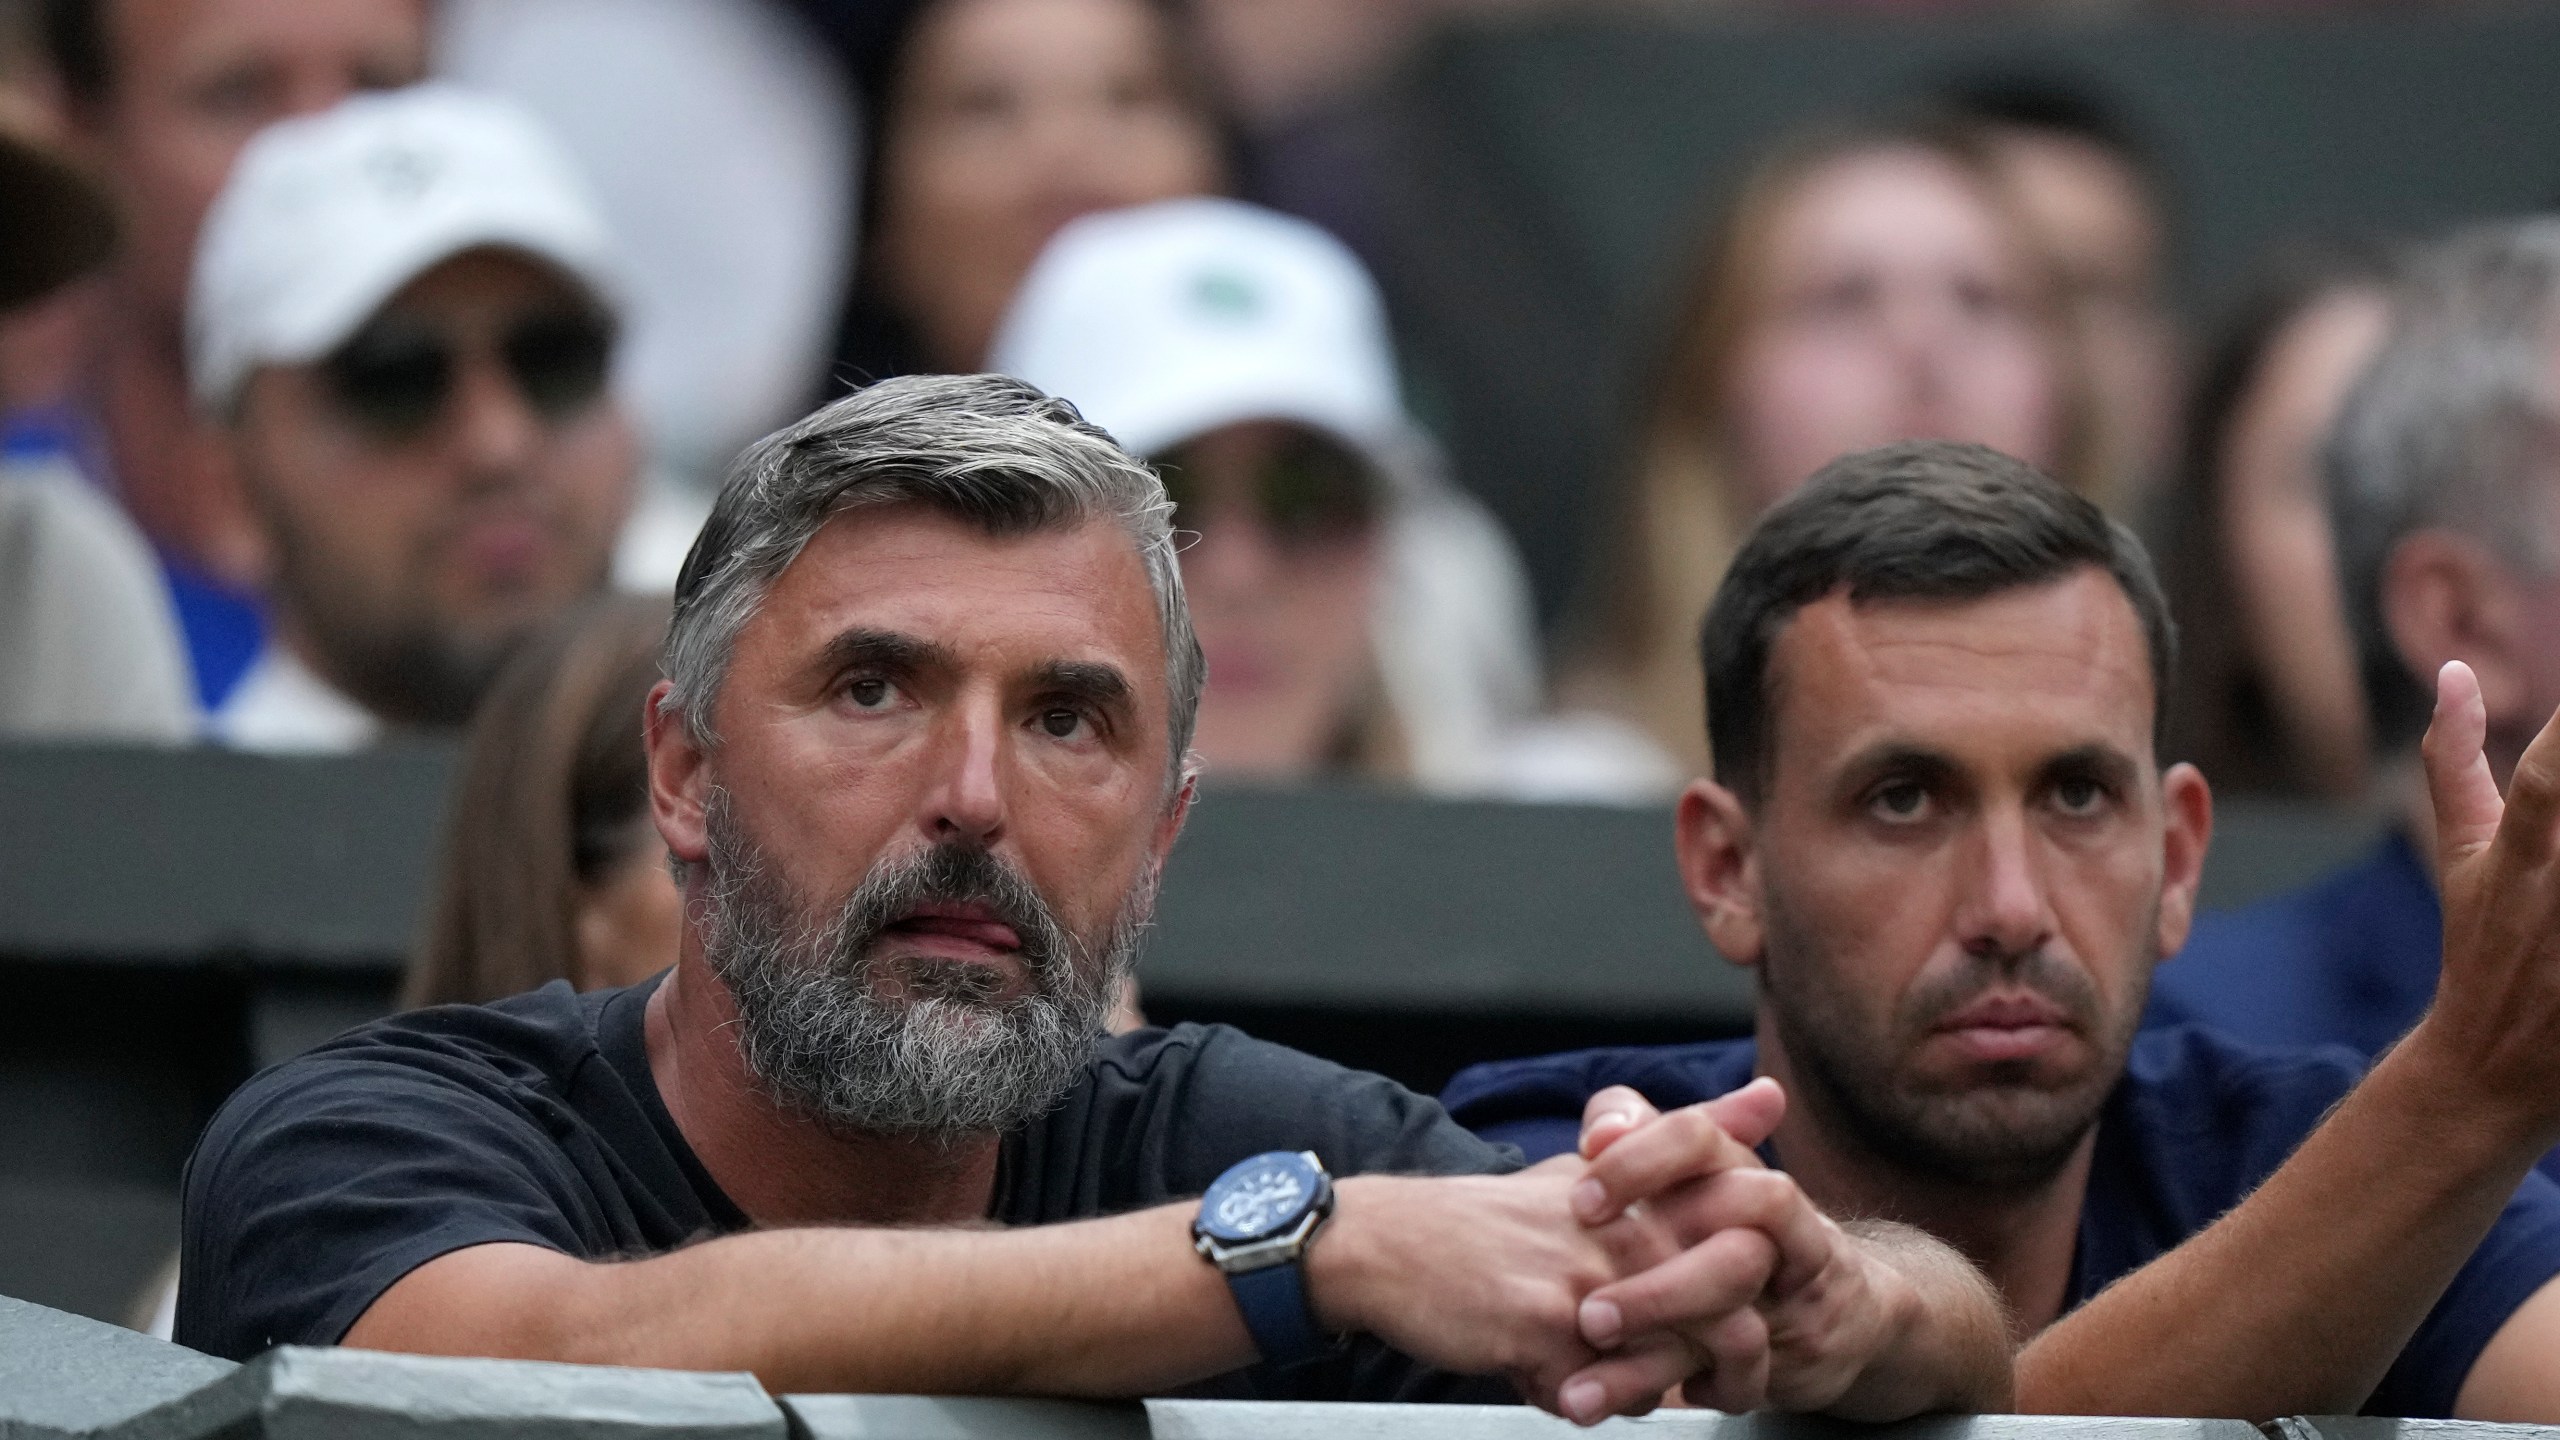 FILE - Goran Ivanisevic, left, a former tennis player and coach of Serbia's Novak Djokovic, watches as he plays Switzerland's Stan Wawrinka in a men's singles match on day five of the Wimbledon tennis championships in London, Friday, July 7, 2023. Djokovic has split with coach Goran Ivanisevic, ending their association that began in 2018 and included 12 Grand Slam titles for the Serbian tennis player, Djokovic wrote in a post on Instagram published Wednesday, March 27, 2024. (AP Photo/Alberto Pezzali, File)